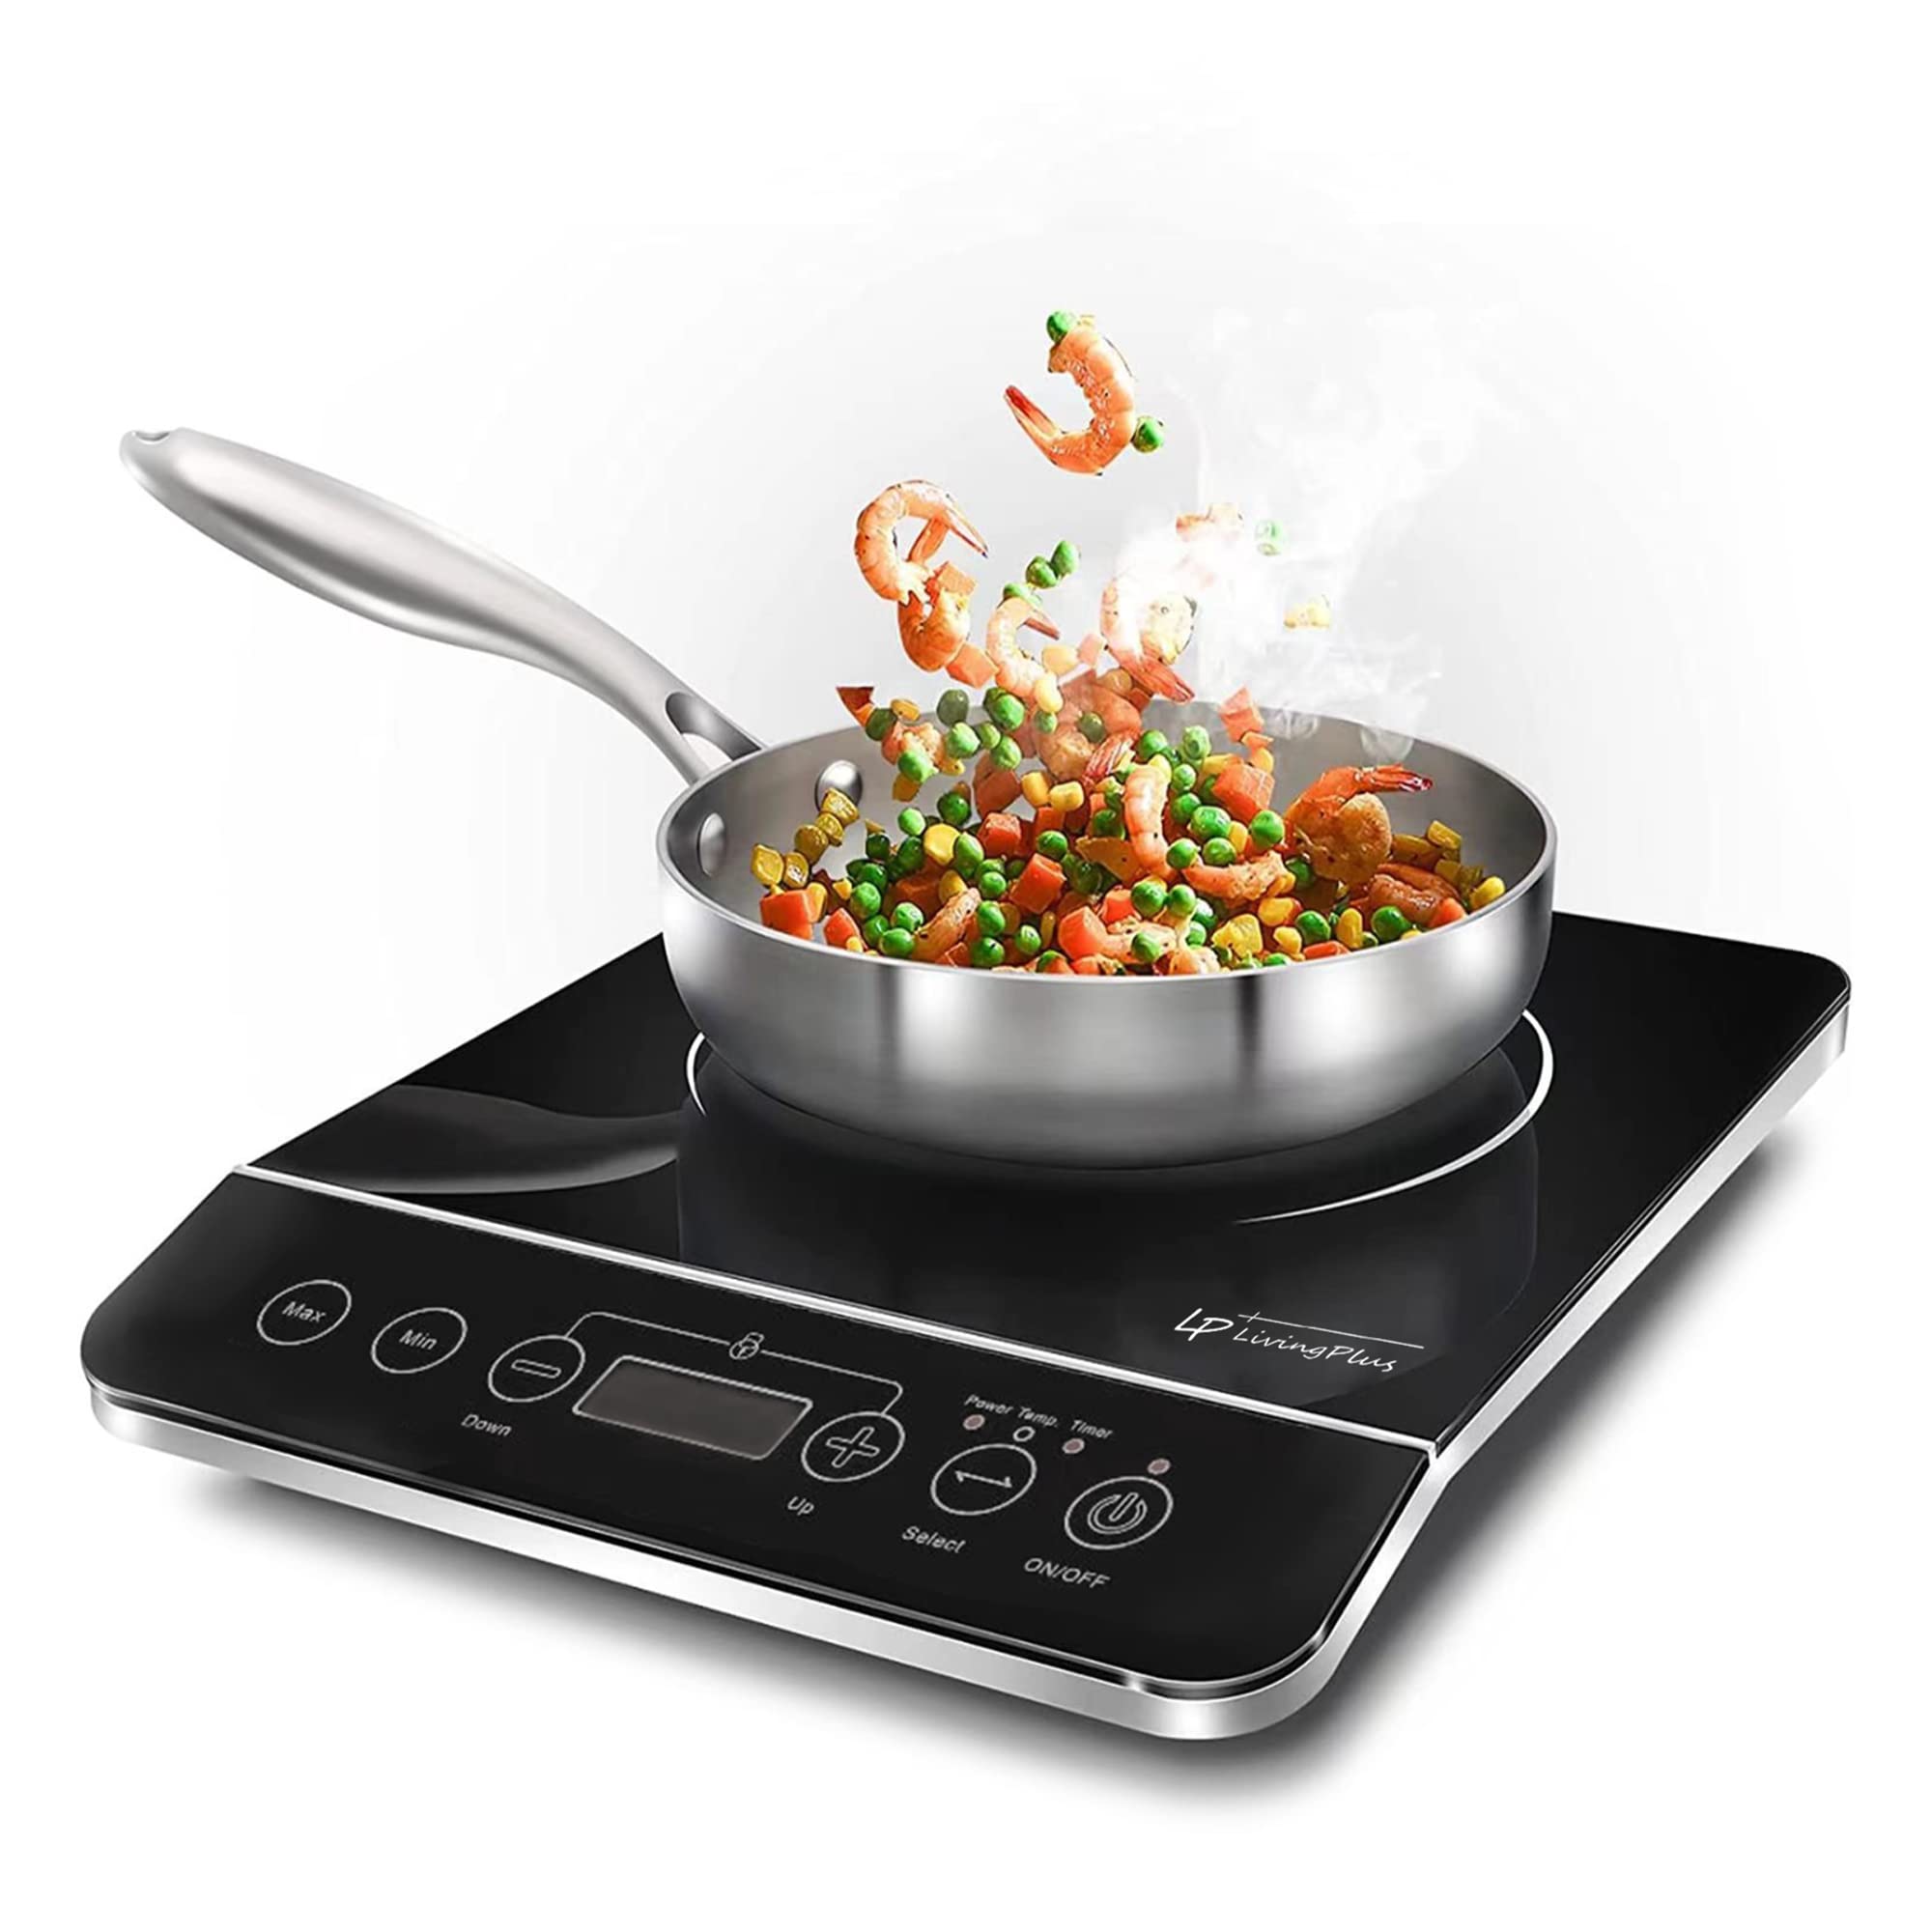 LP Living Plus 1800W Electric Induction cooktop countertop Burner, 3 Hour Max Timer Setting, Auto shut off, child safety lock